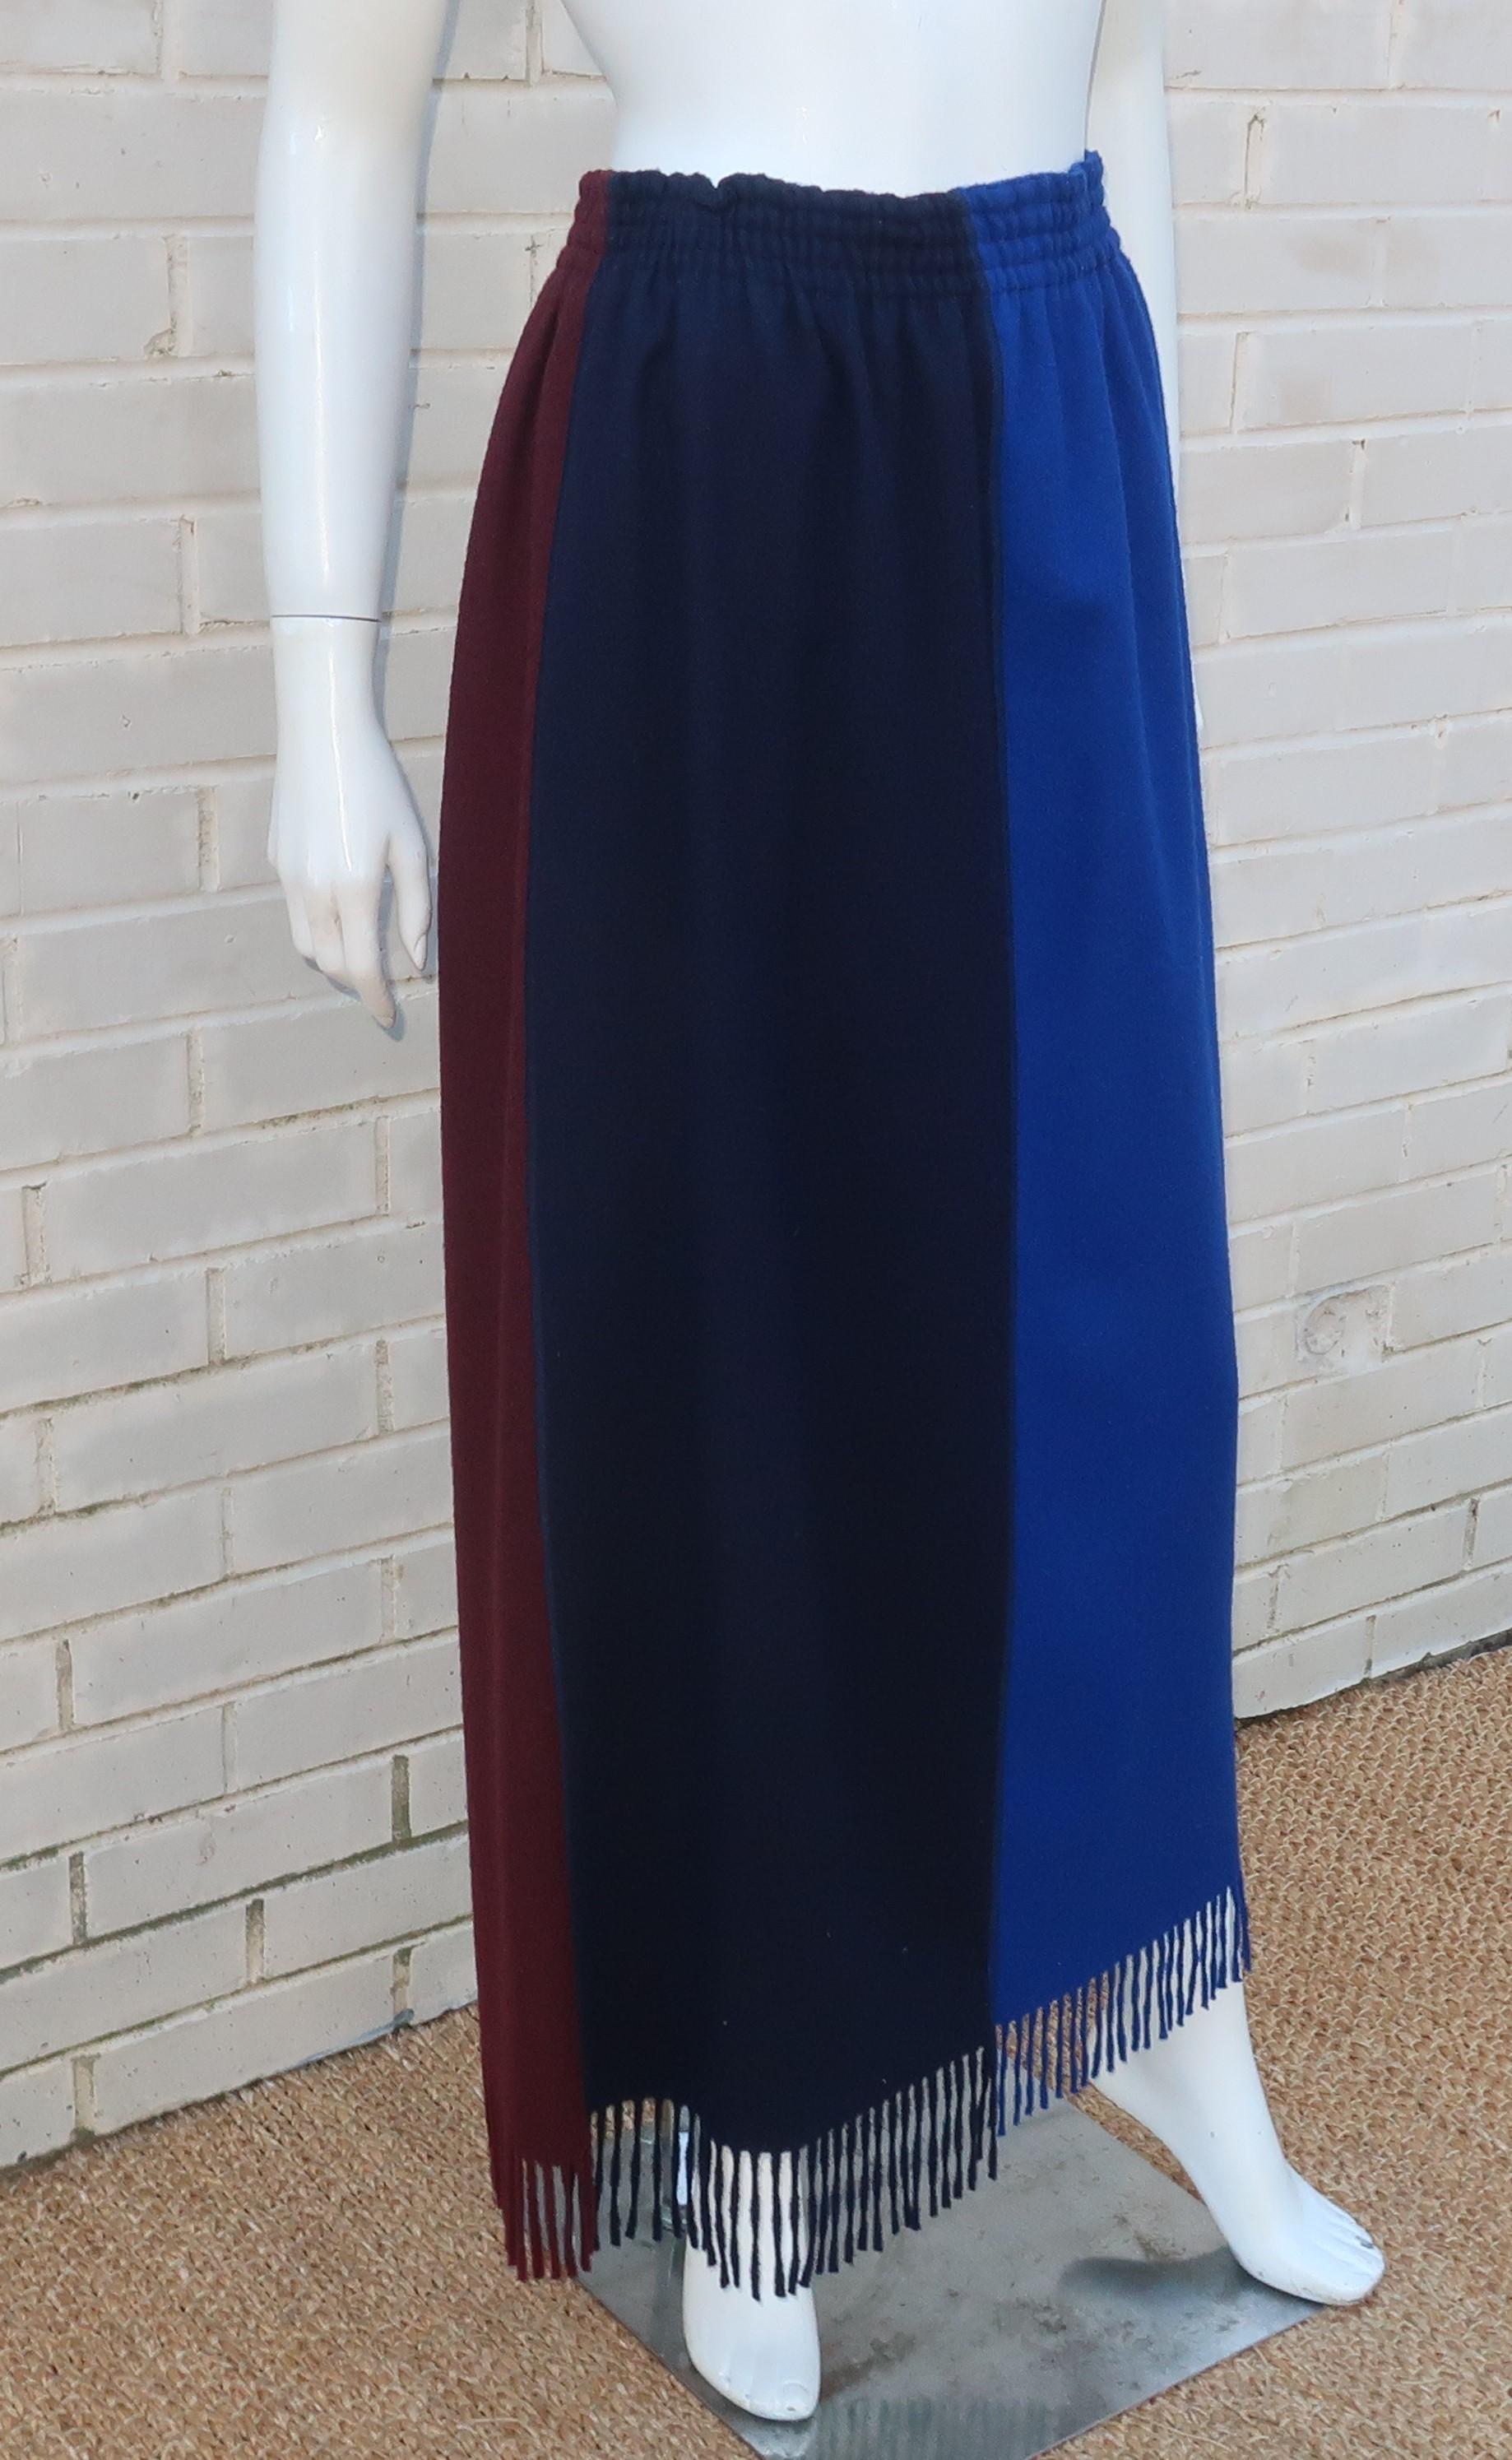 Jean Paul Gaultier pull on wool skirt with a four panel color block design including shades of bright blue, midnight blue (almost black), brown and teal.  The maxi length and fringe hemline provide both a stylish and cozy look especially when paired